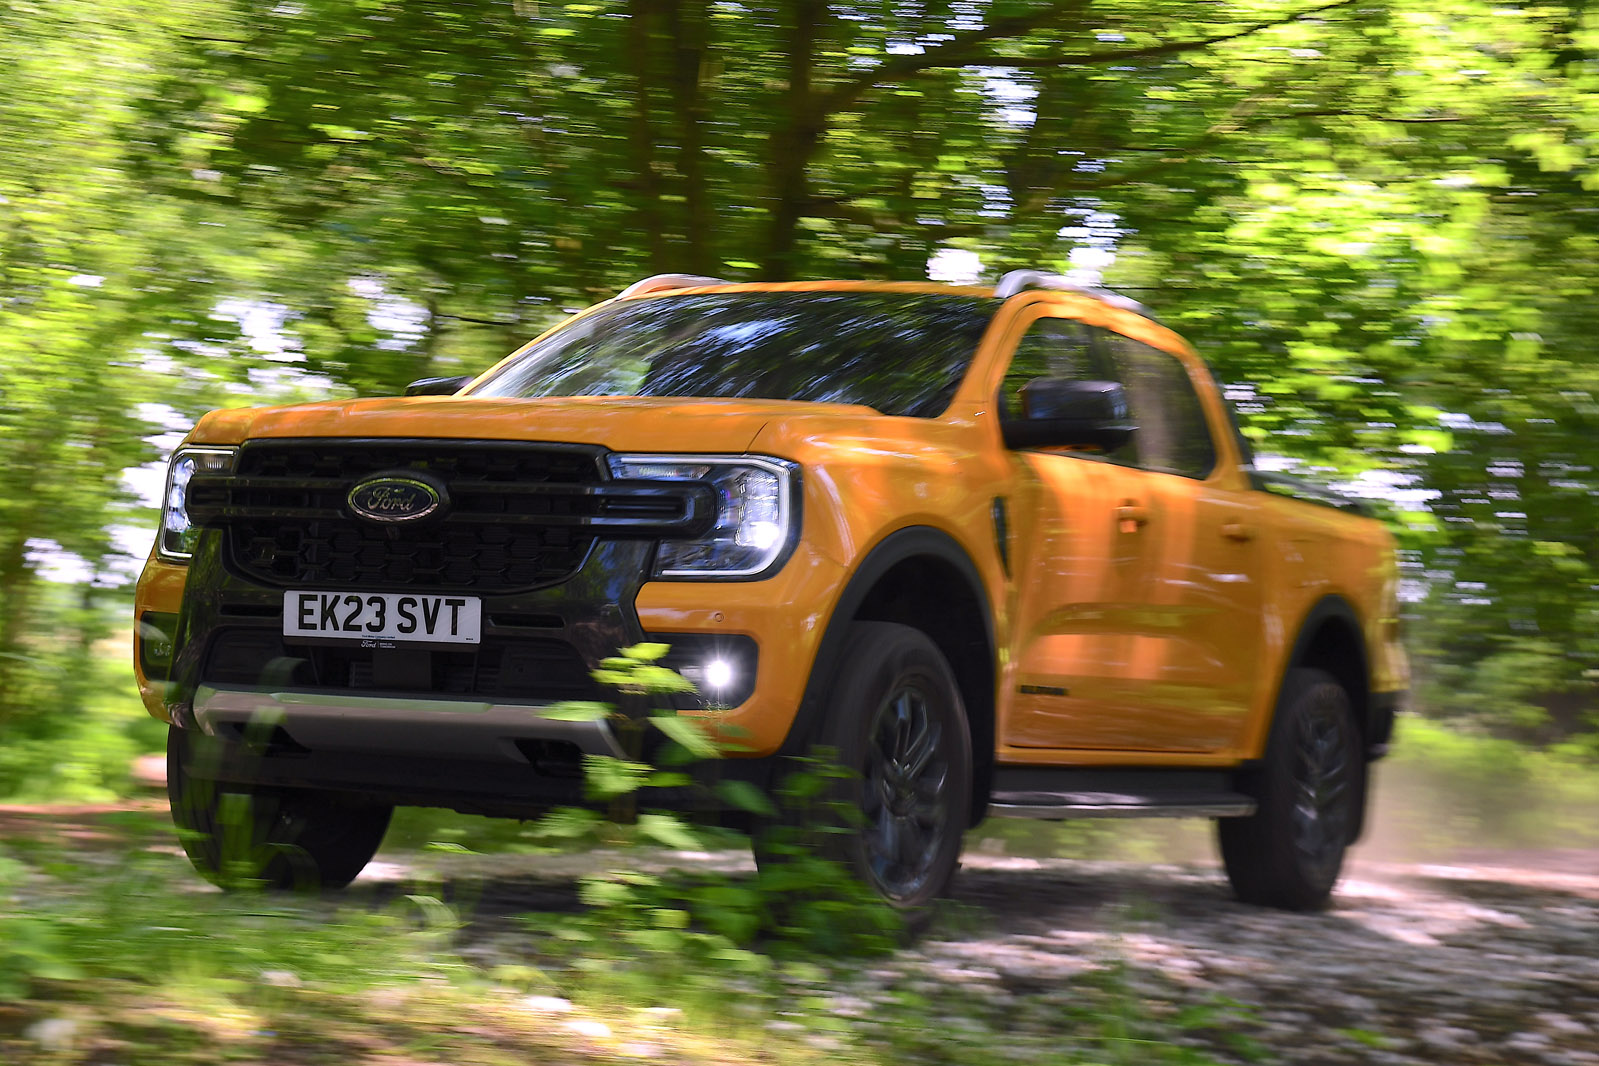 Replacing a core support - Ranger-Forums - The Ultimate Ford Ranger Resource